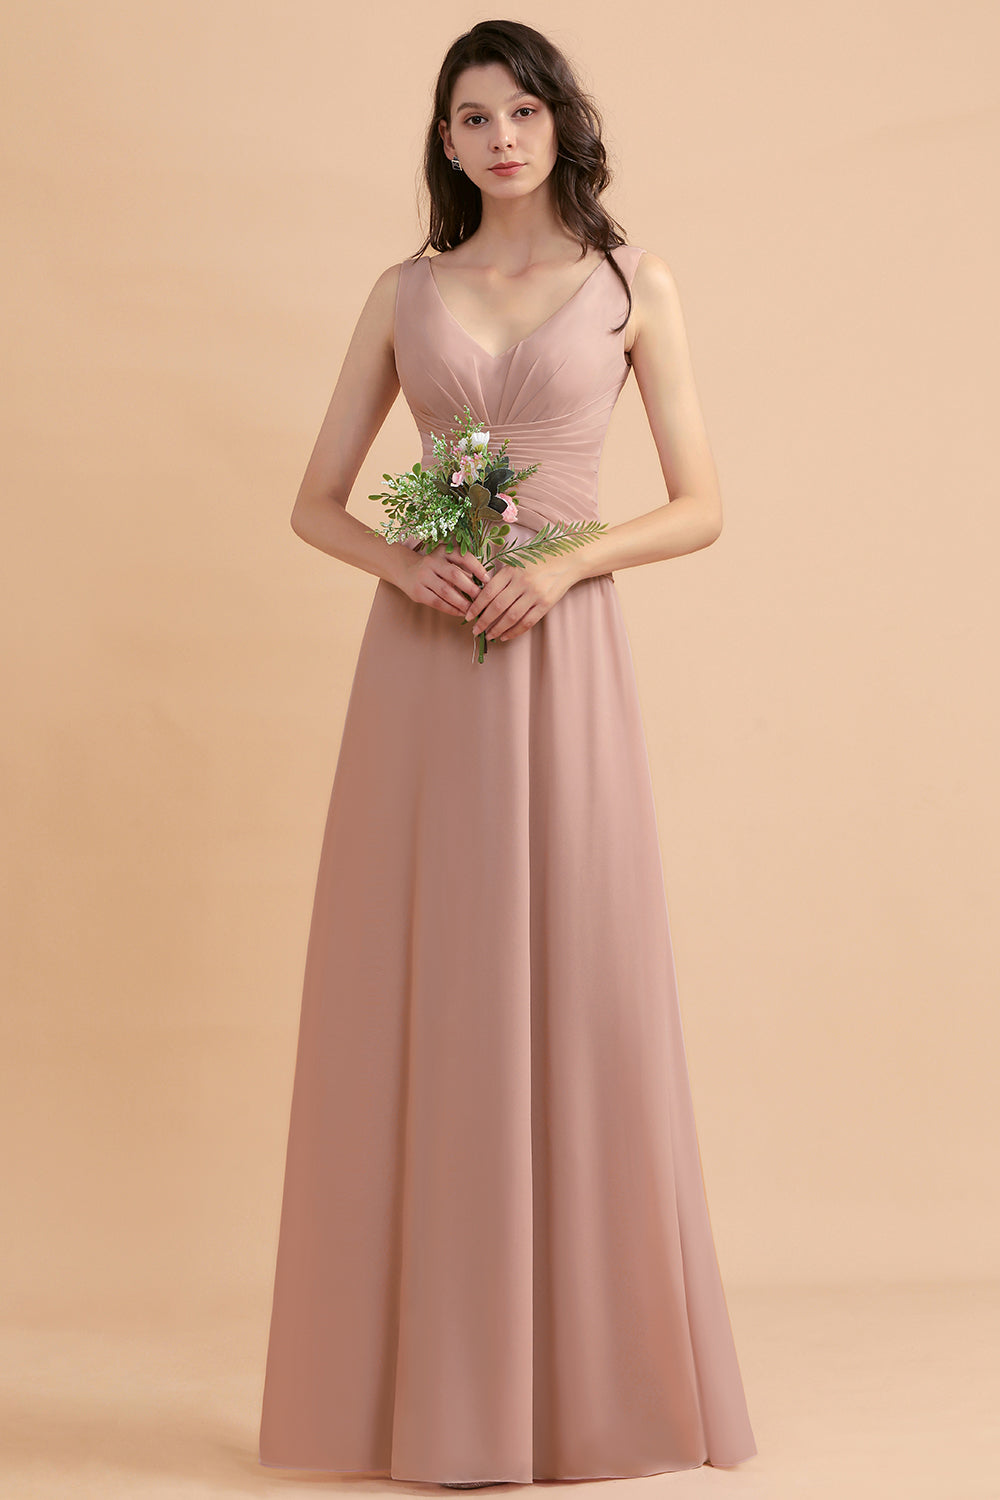 Load image into Gallery viewer, A-Line V-neck Chiffon Backless Bridesmaid Dress Classy Long Maid of Honor Dress-BIZTUNNEL
